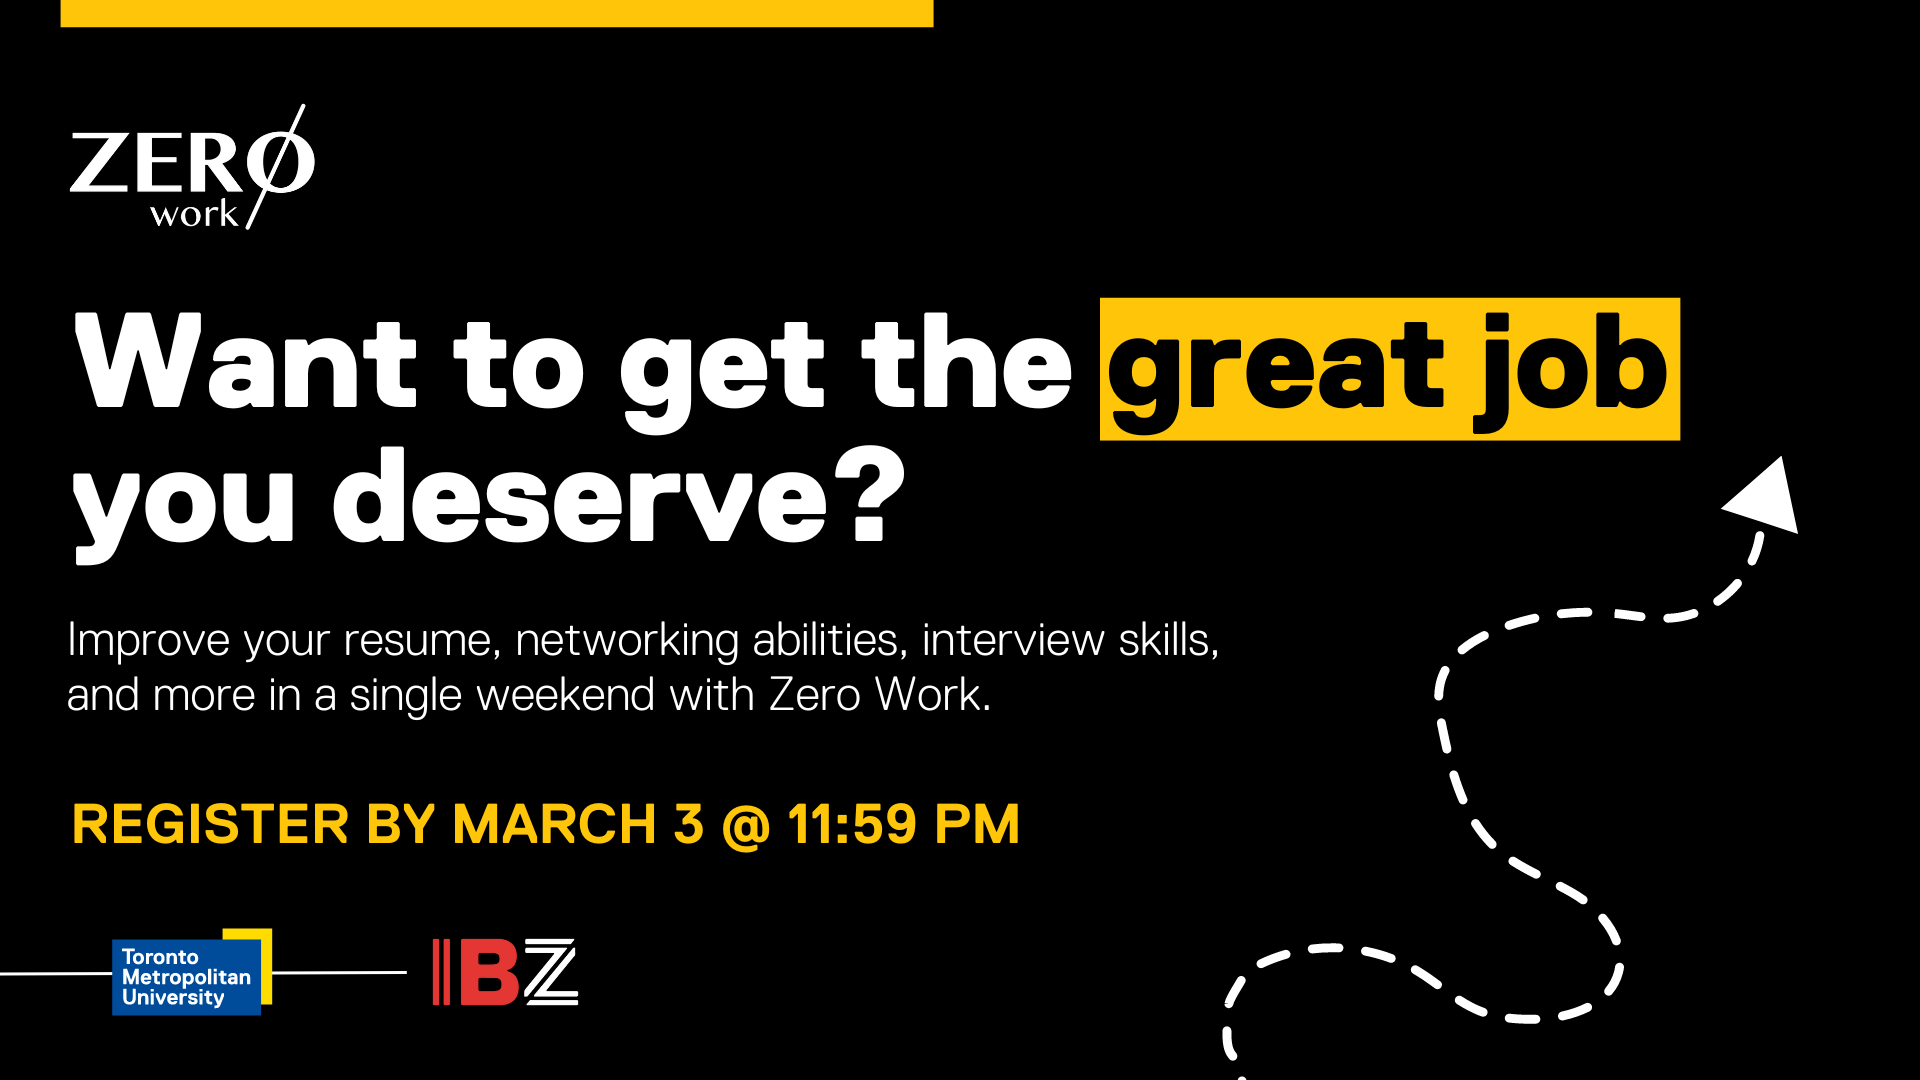 Zero Work - want to get the great job you deserve? Improve your resume, networking, and interview skills in a single weekend.